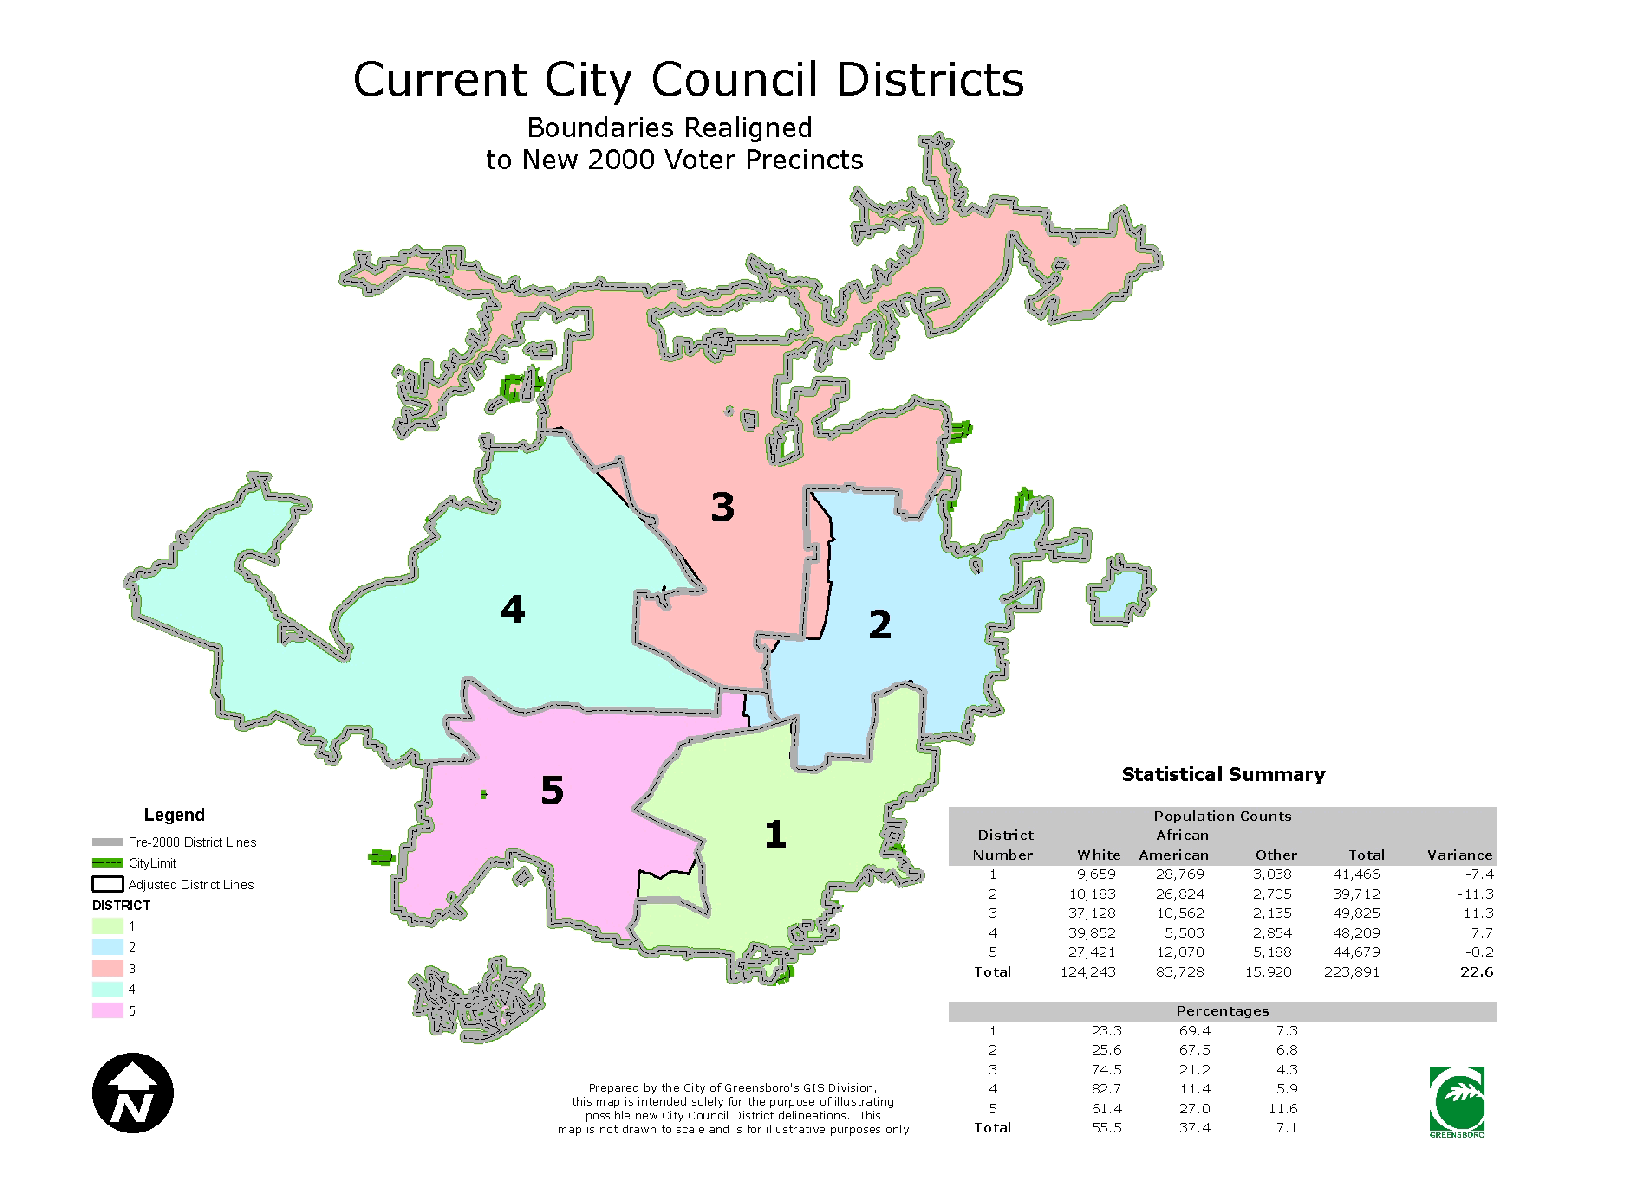 Existing district lines with 2000 population counts